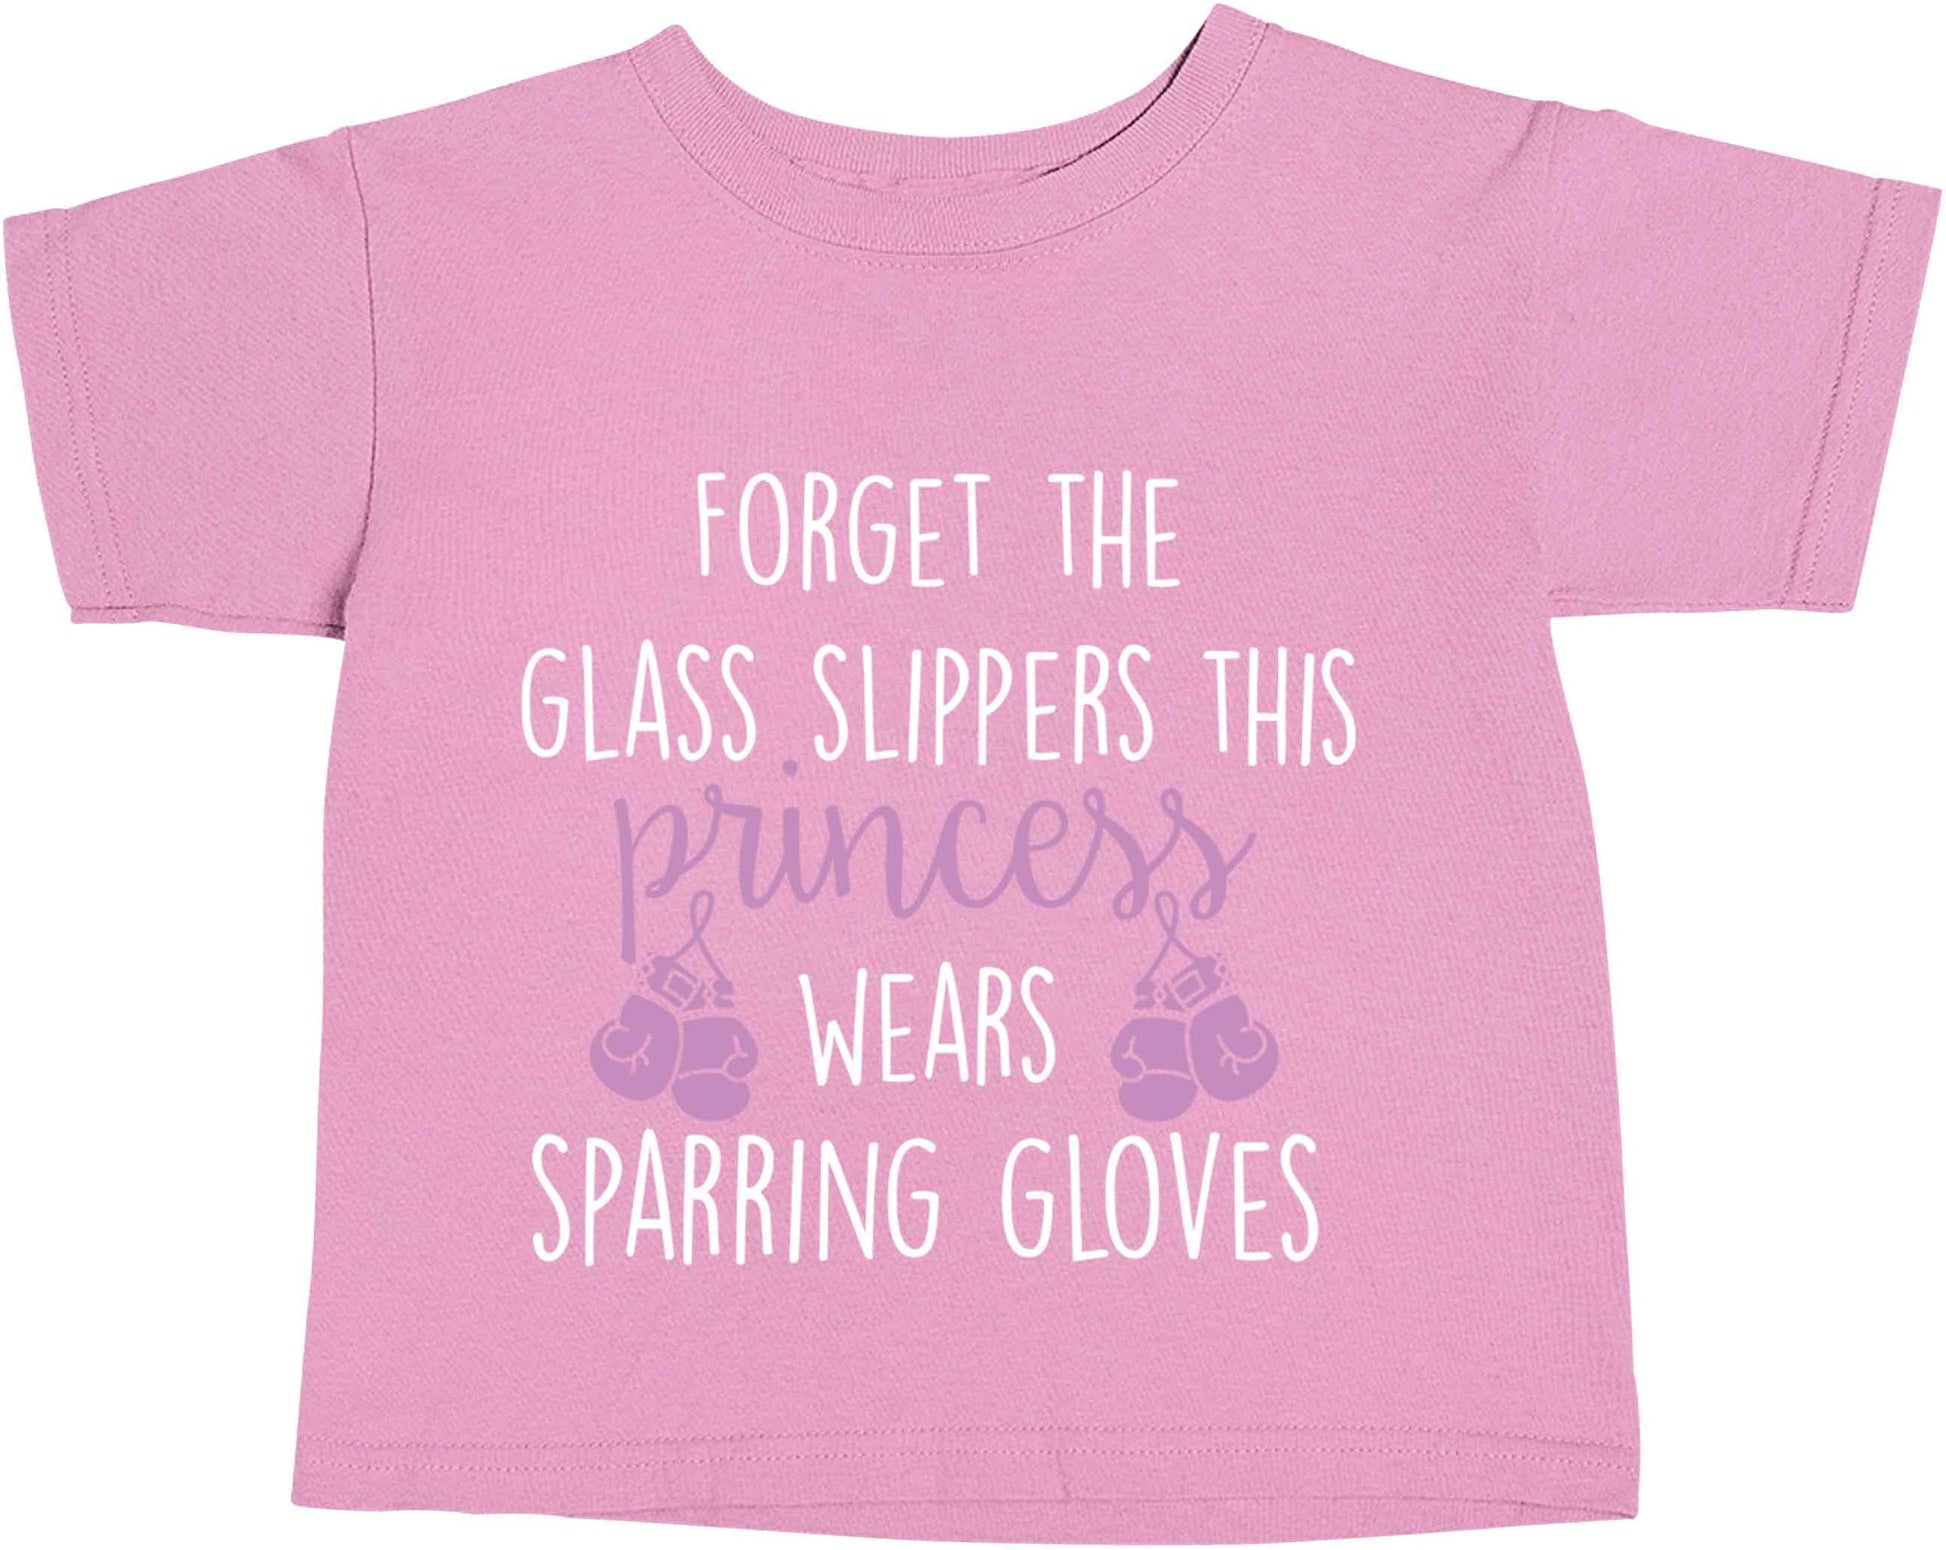 Forget the glass slippers this princess wears sparring gloves light pink baby toddler Tshirt 2 Years